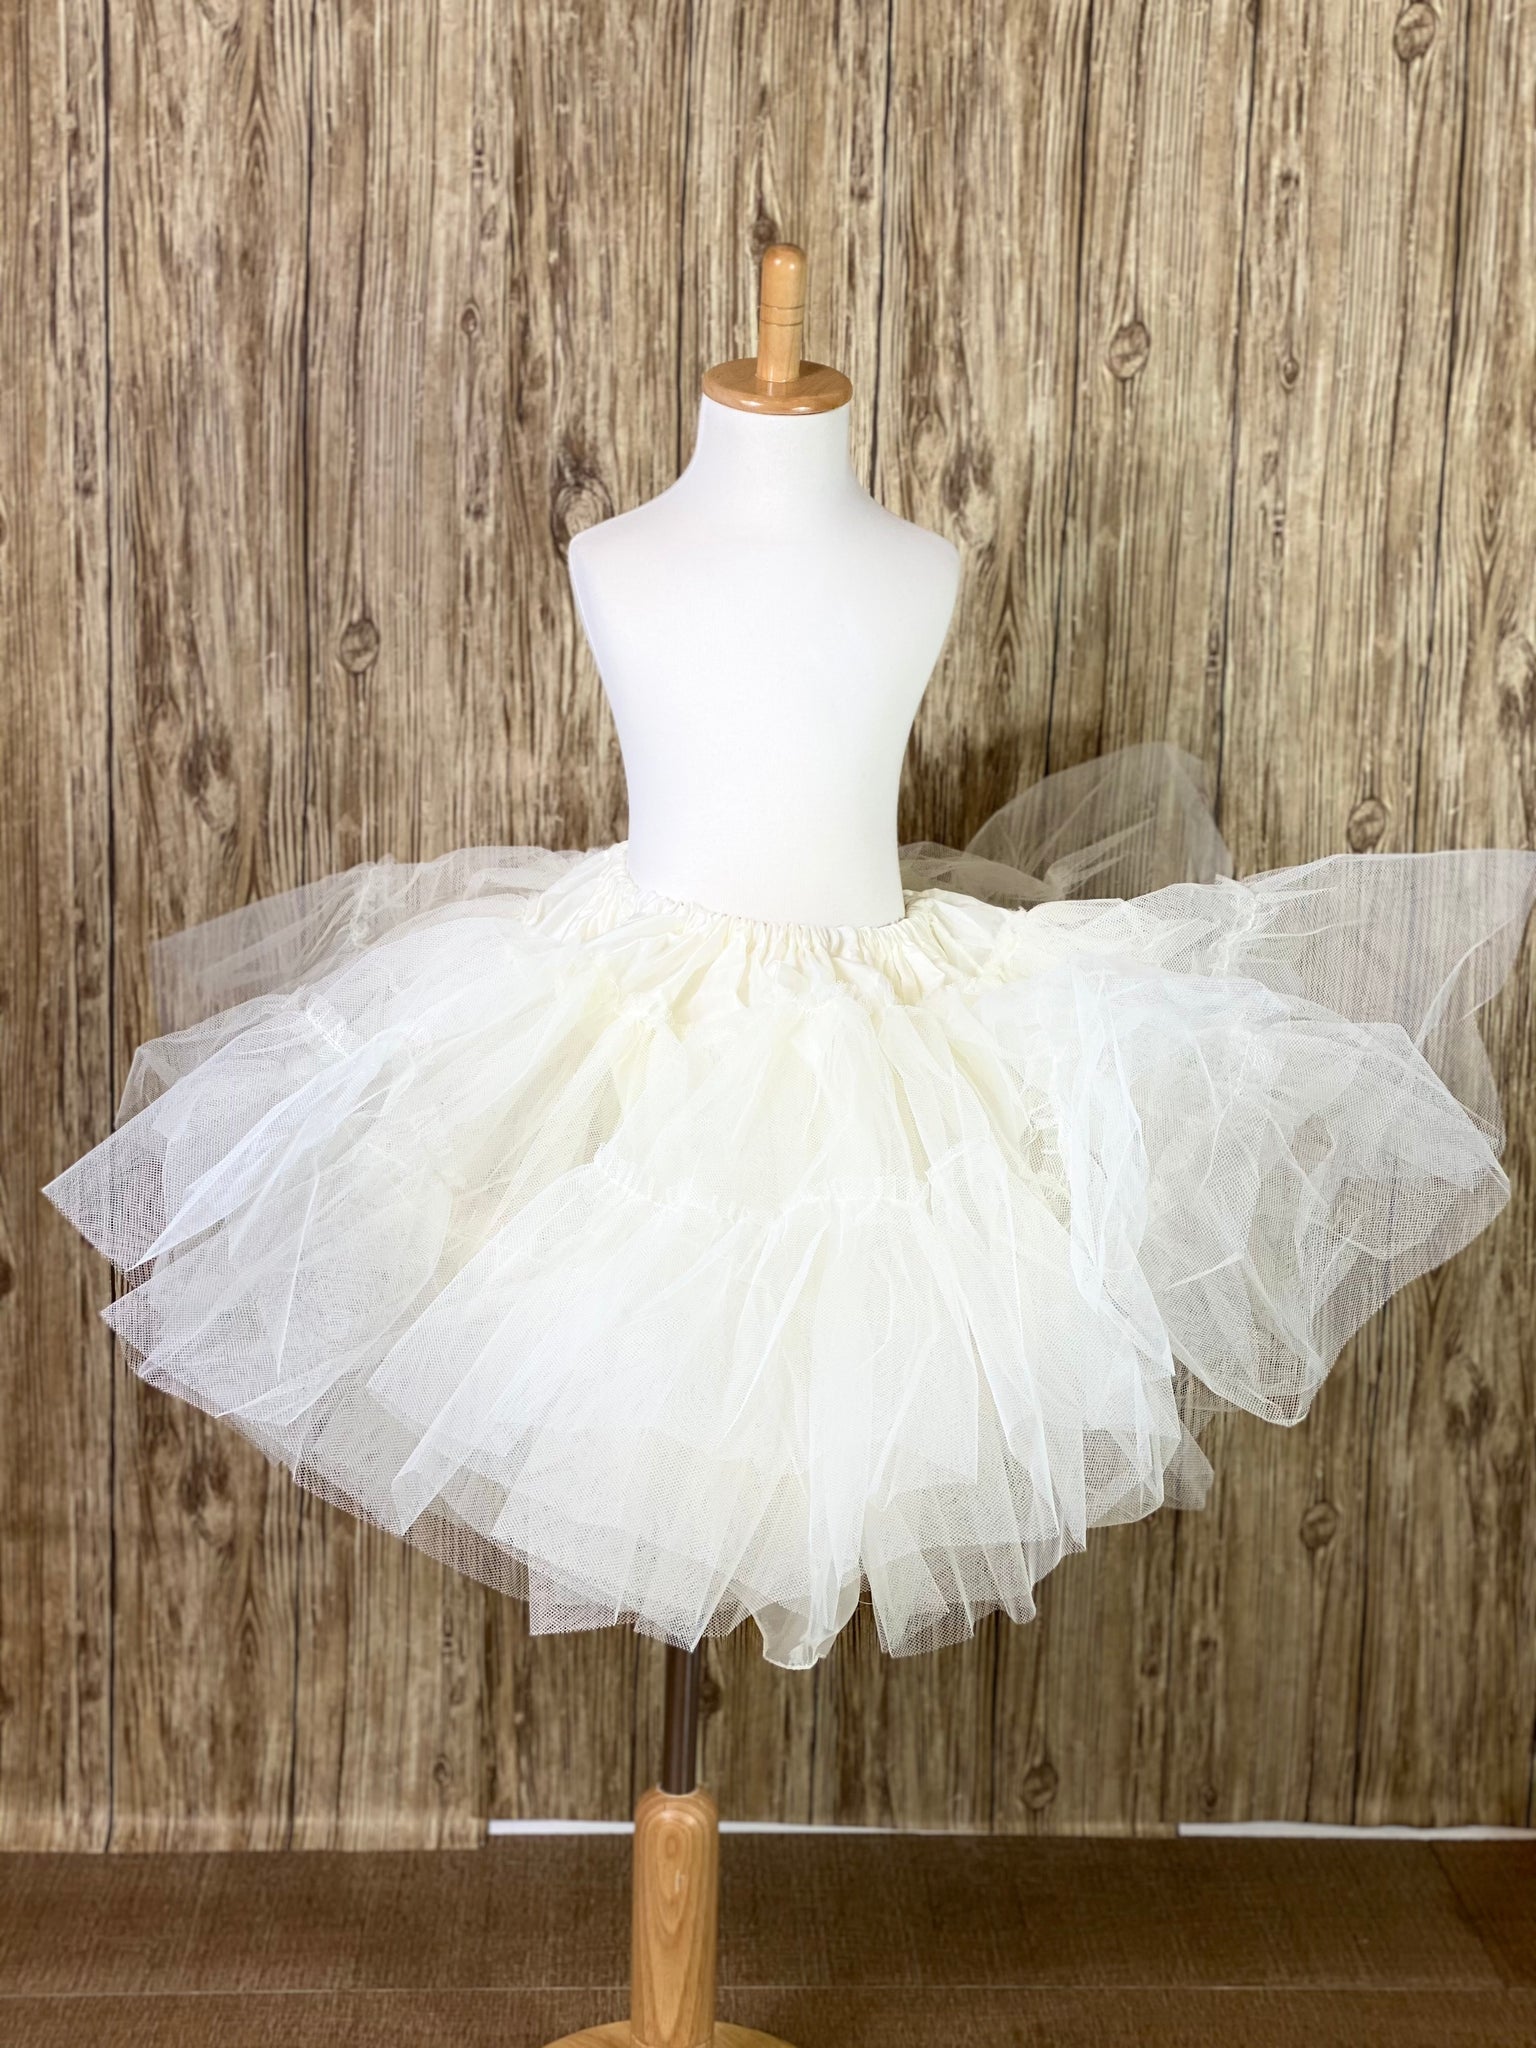 Communion and Pageant/Celebration dresses will look beautifully puffy!  The tulle petticoat is a must have to complete the look and showcase the dress!   The petticoat is ivory in color yet will go well with the white communion dresses too.  It is made with several yards of tulle layers made of net and a soft inner lining with an elastic waist band.  Small - 15 in long by 40 in wide (Girls Size 3-6)  Medium - 25 in long by 42 in wide (Girls Size 8-12)